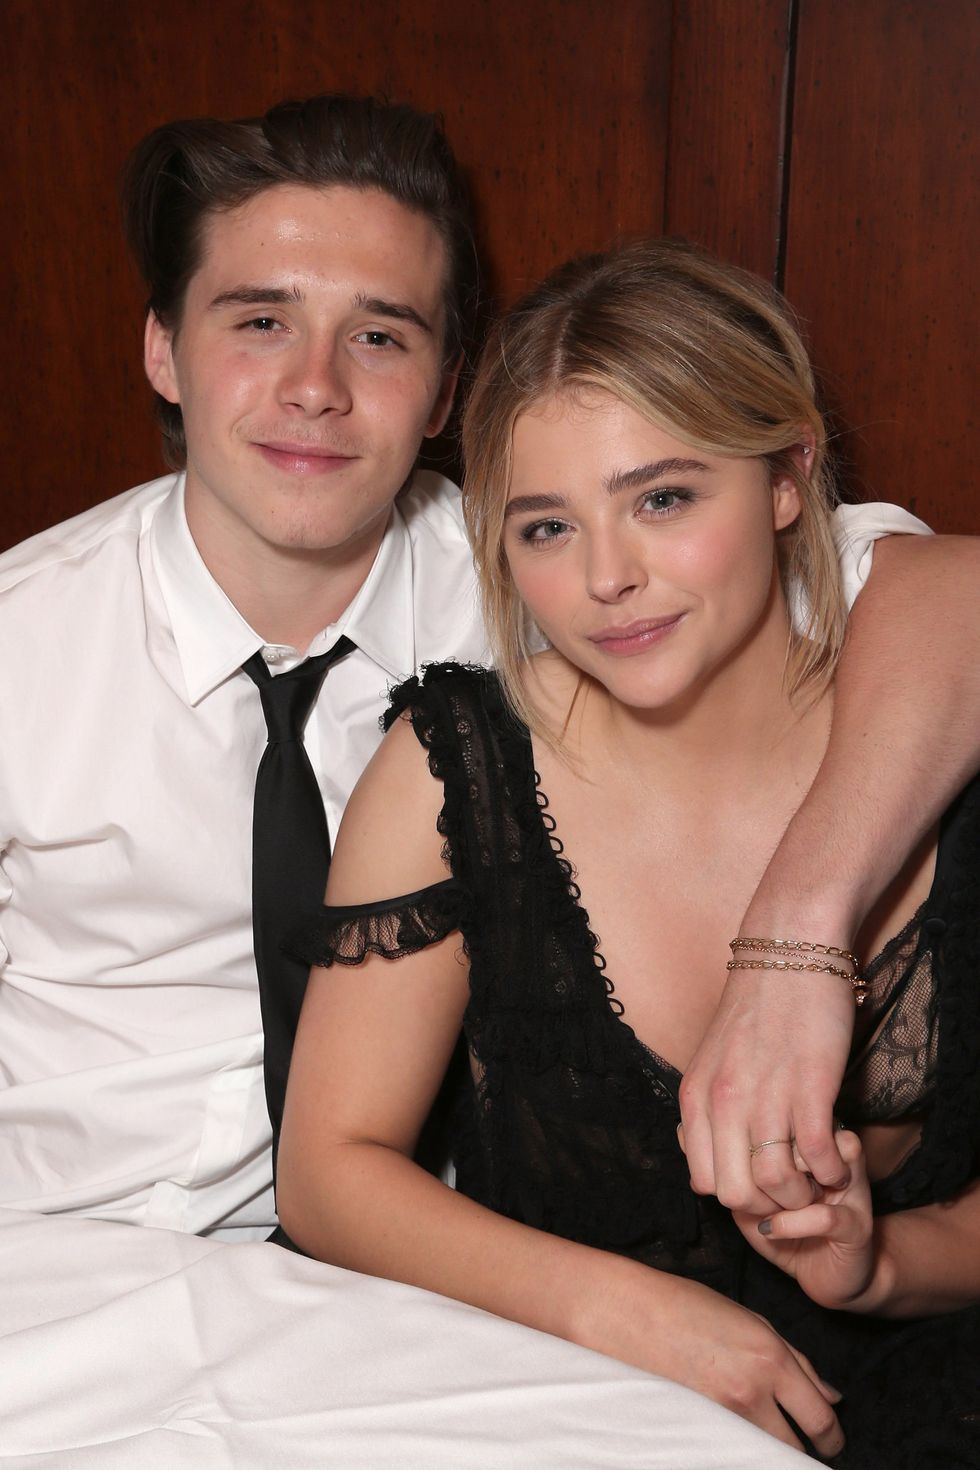 <p>The teen couple started dating back in 2014 and despite breaking up in 2015, started dating again earlier this year. After a number of <a href="http://www.harpersbazaar.com/celebrity/latest/a15562/chloe-grace-moretz-confirms-shes-dating-brooklyn-beckham/" target="_blank" data-tracking-id="recirc-text-link">cute interviews</a>, couple <a href="http://www.harpersbazaar.com/celebrity/latest/a15344/brookyln-beckham-chloe-grace-moretz-instagram/" target="_blank" data-tracking-id="recirc-text-link">Instagram pics</a> and even a <a href="http://www.harpersbazaar.com/celebrity/latest/a15673/chloe-grace-moretz-brooklyn-beckham-red-carpet-photos/" target="_blank" data-tracking-id="recirc-text-link">red carpet debu</a>t, Beckham and Moretz quietly <a href="http://www.harpersbazaar.com/culture/news/a17487/chloe-grace-moretz-brooklyn-beckham-split/" target="_blank" data-tracking-id="recirc-text-link">called it quits</a> again in September. </p>